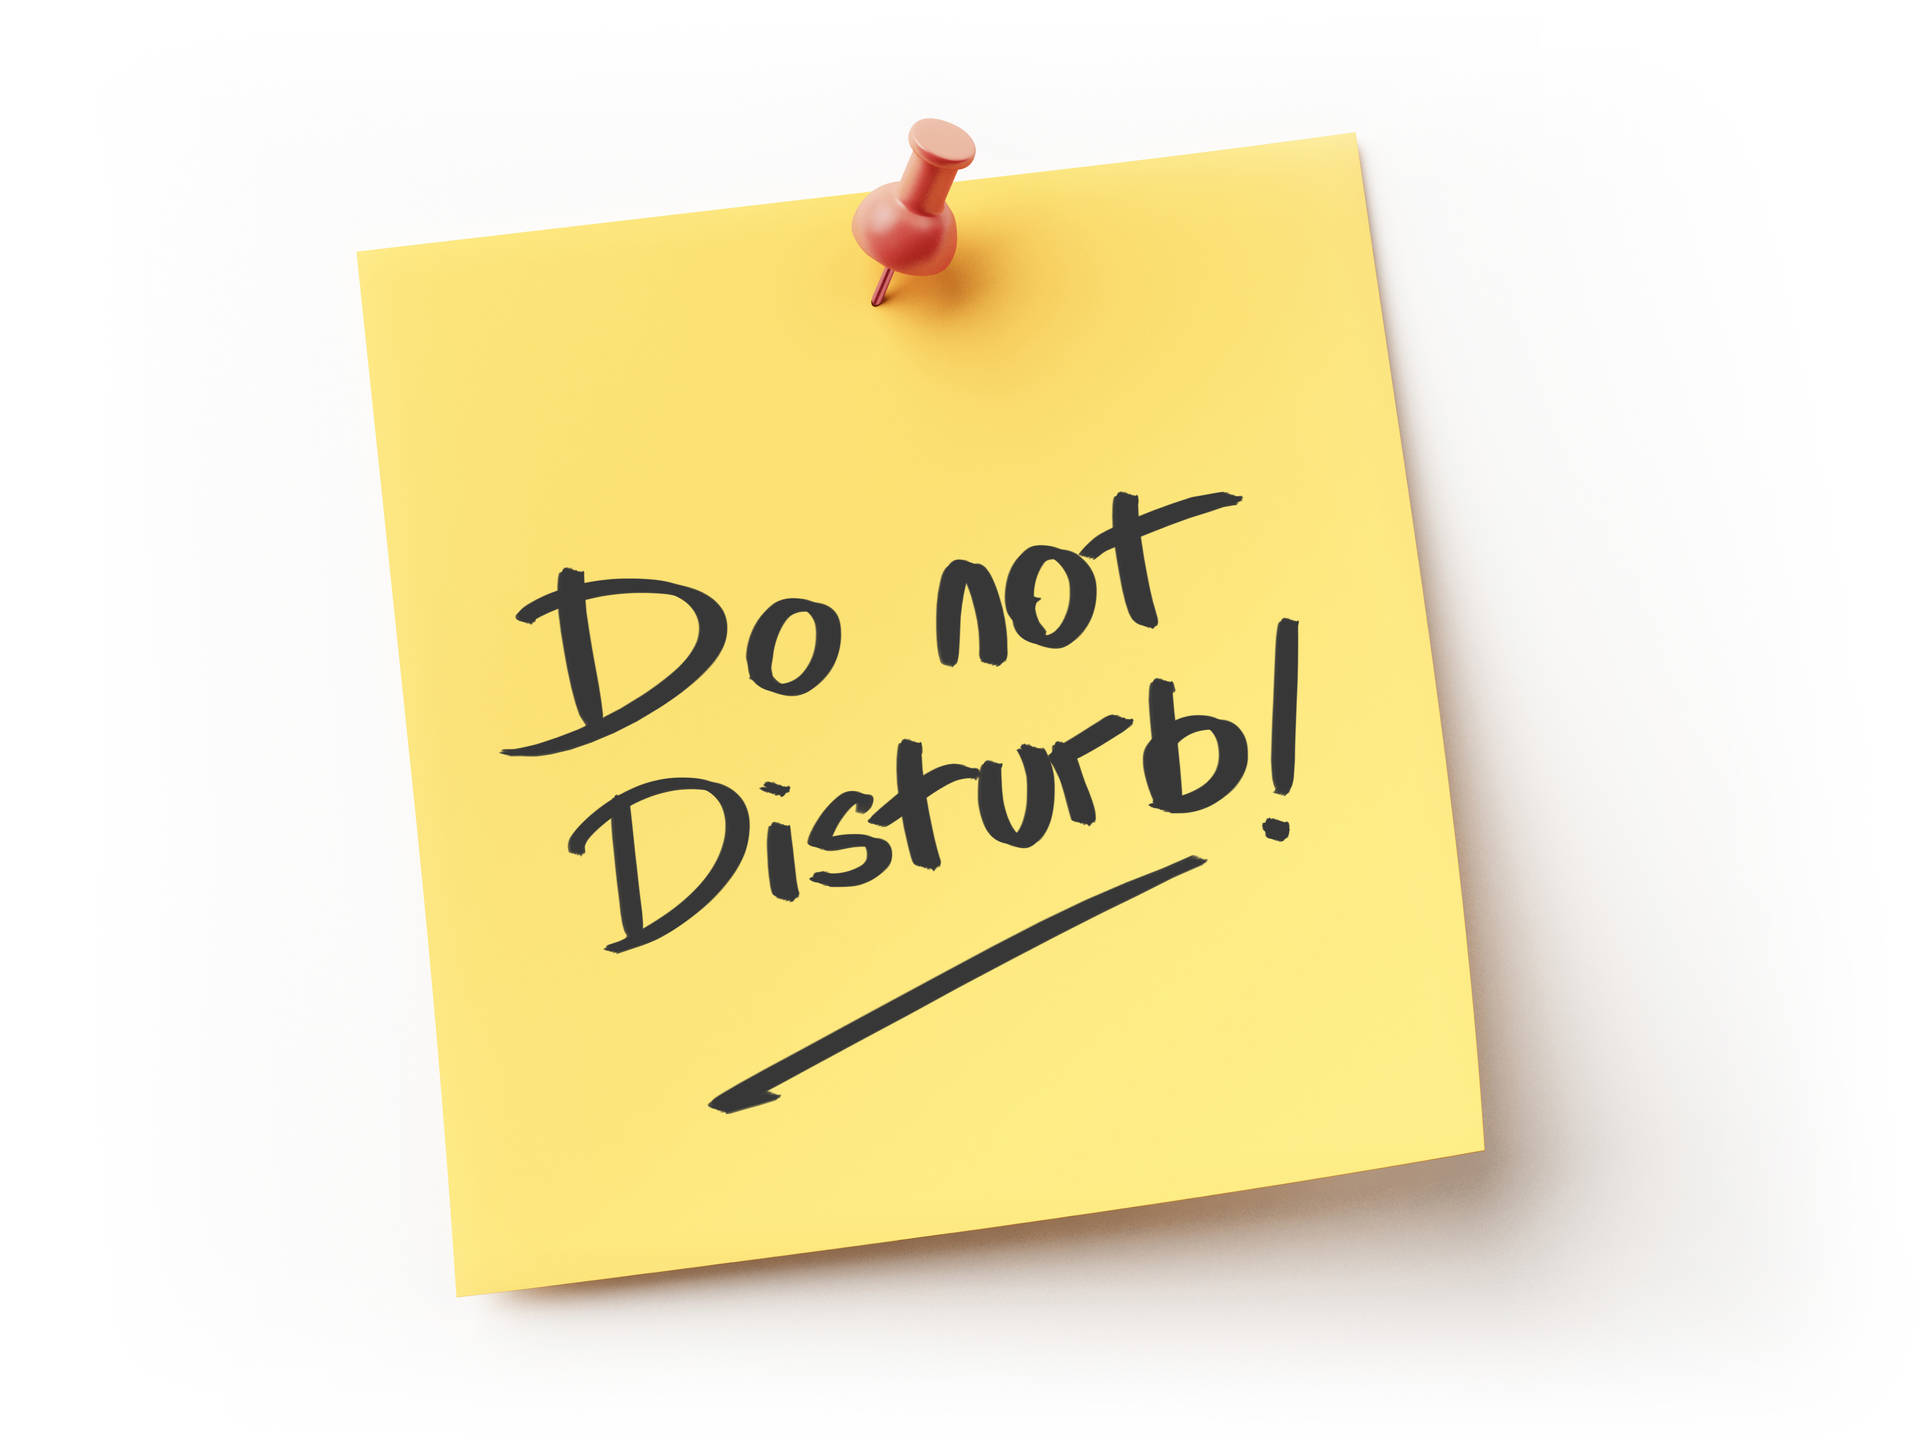 Do not disturb iPhone X Wallpapers Free Download